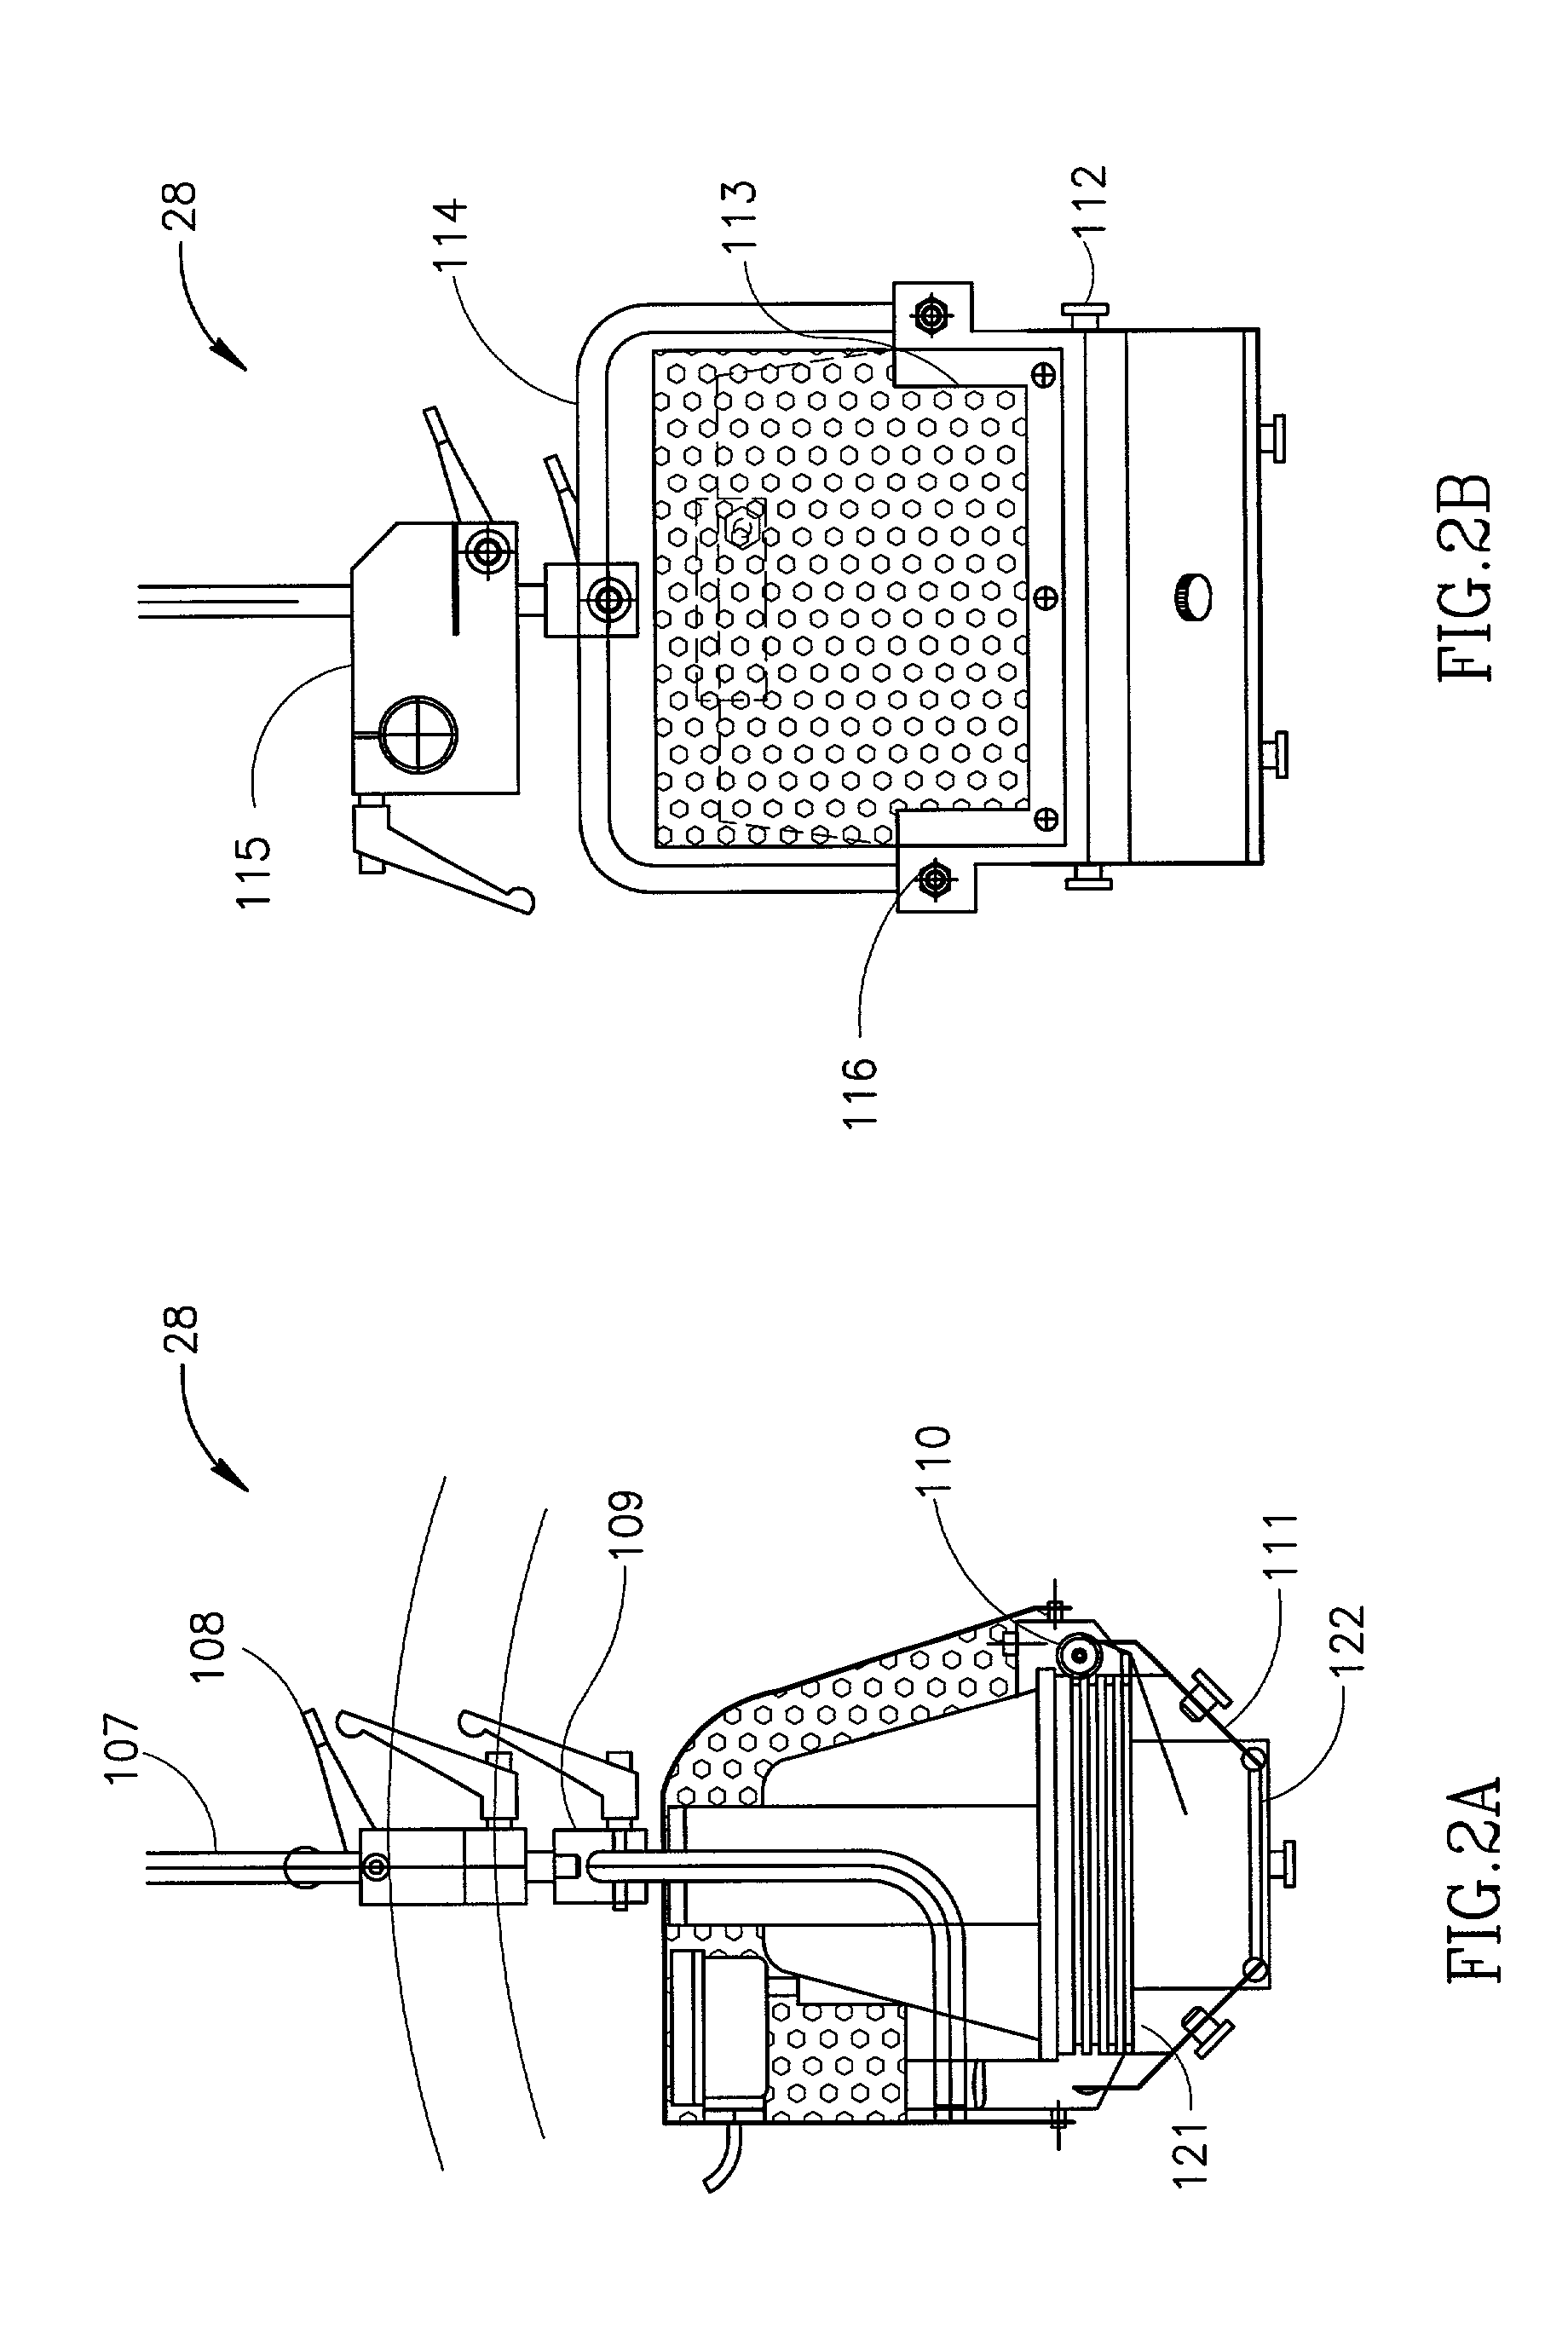 Apparatus and method for high energy photodynamic therapy of acne vulgaris and seborrhea